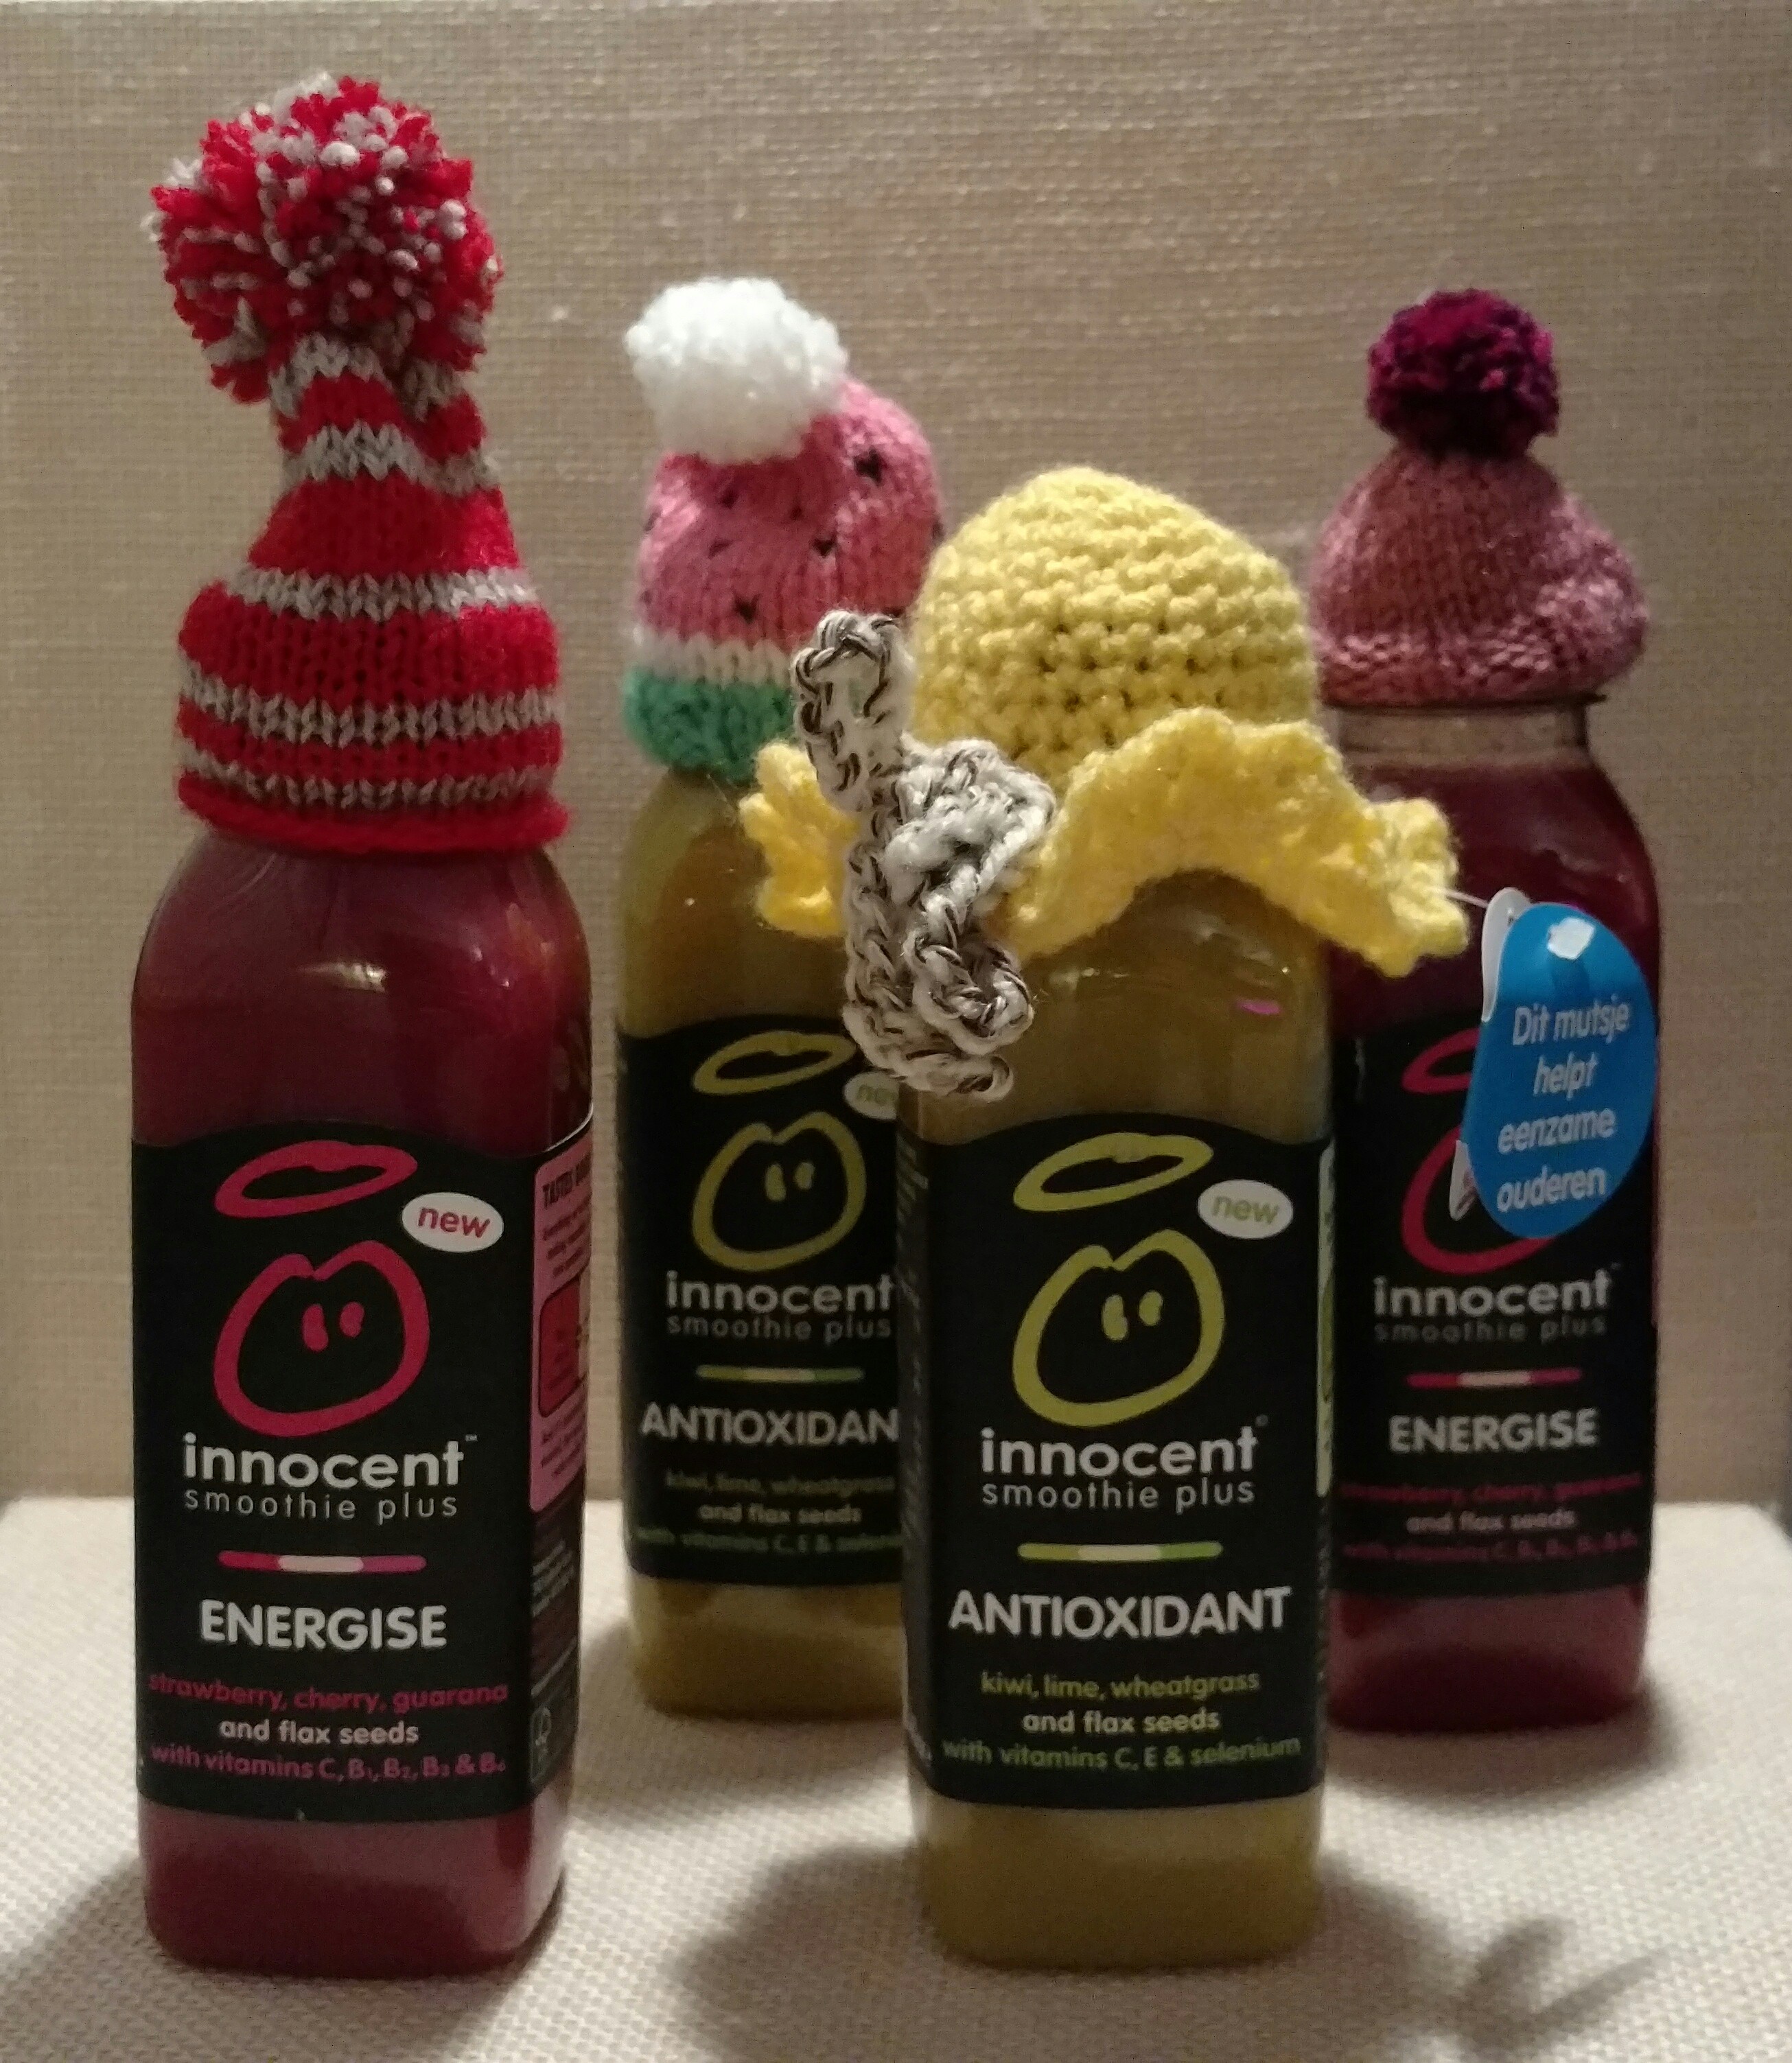 Innocent smoothies with hats...